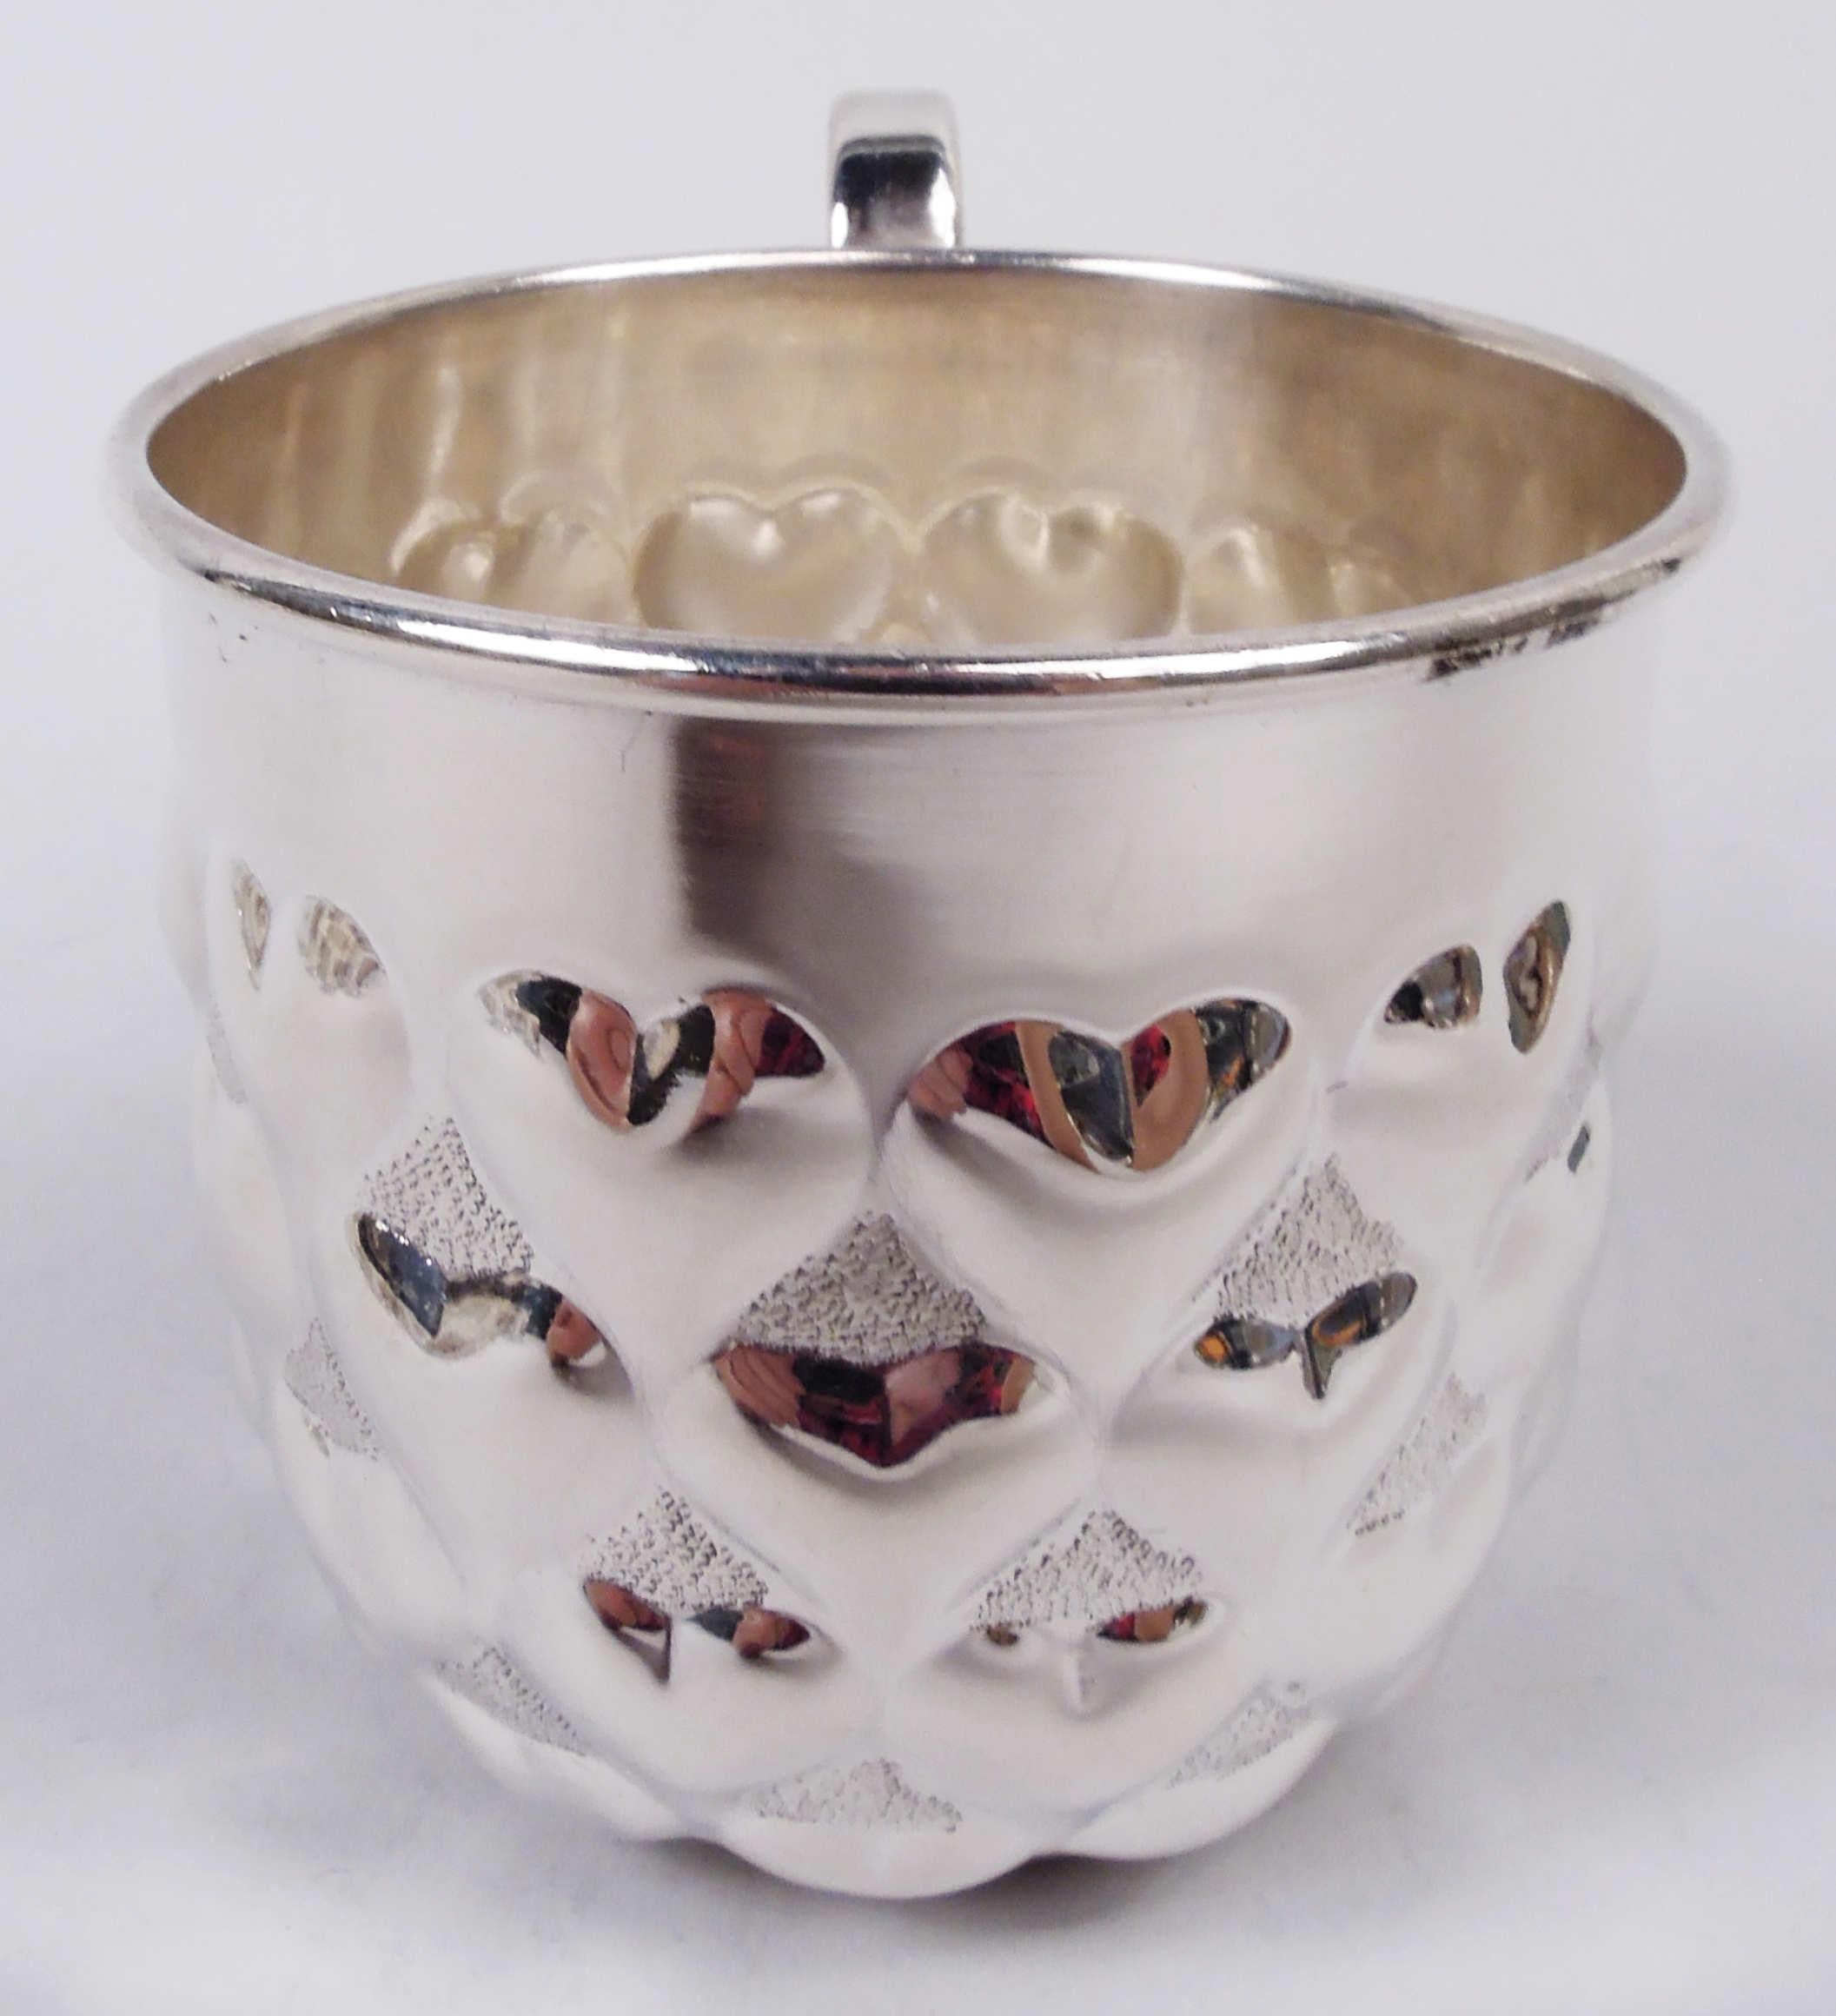 Modern sterling silver baby cup. Retailed by Tiffany & Co. In New York. Gently curved sides with rows of embossed hearts on stippled ground. Top vacant. High-looping scroll handle. Marked “Tiffany & Co. / Sterling / Italy” with post-1967 Italian